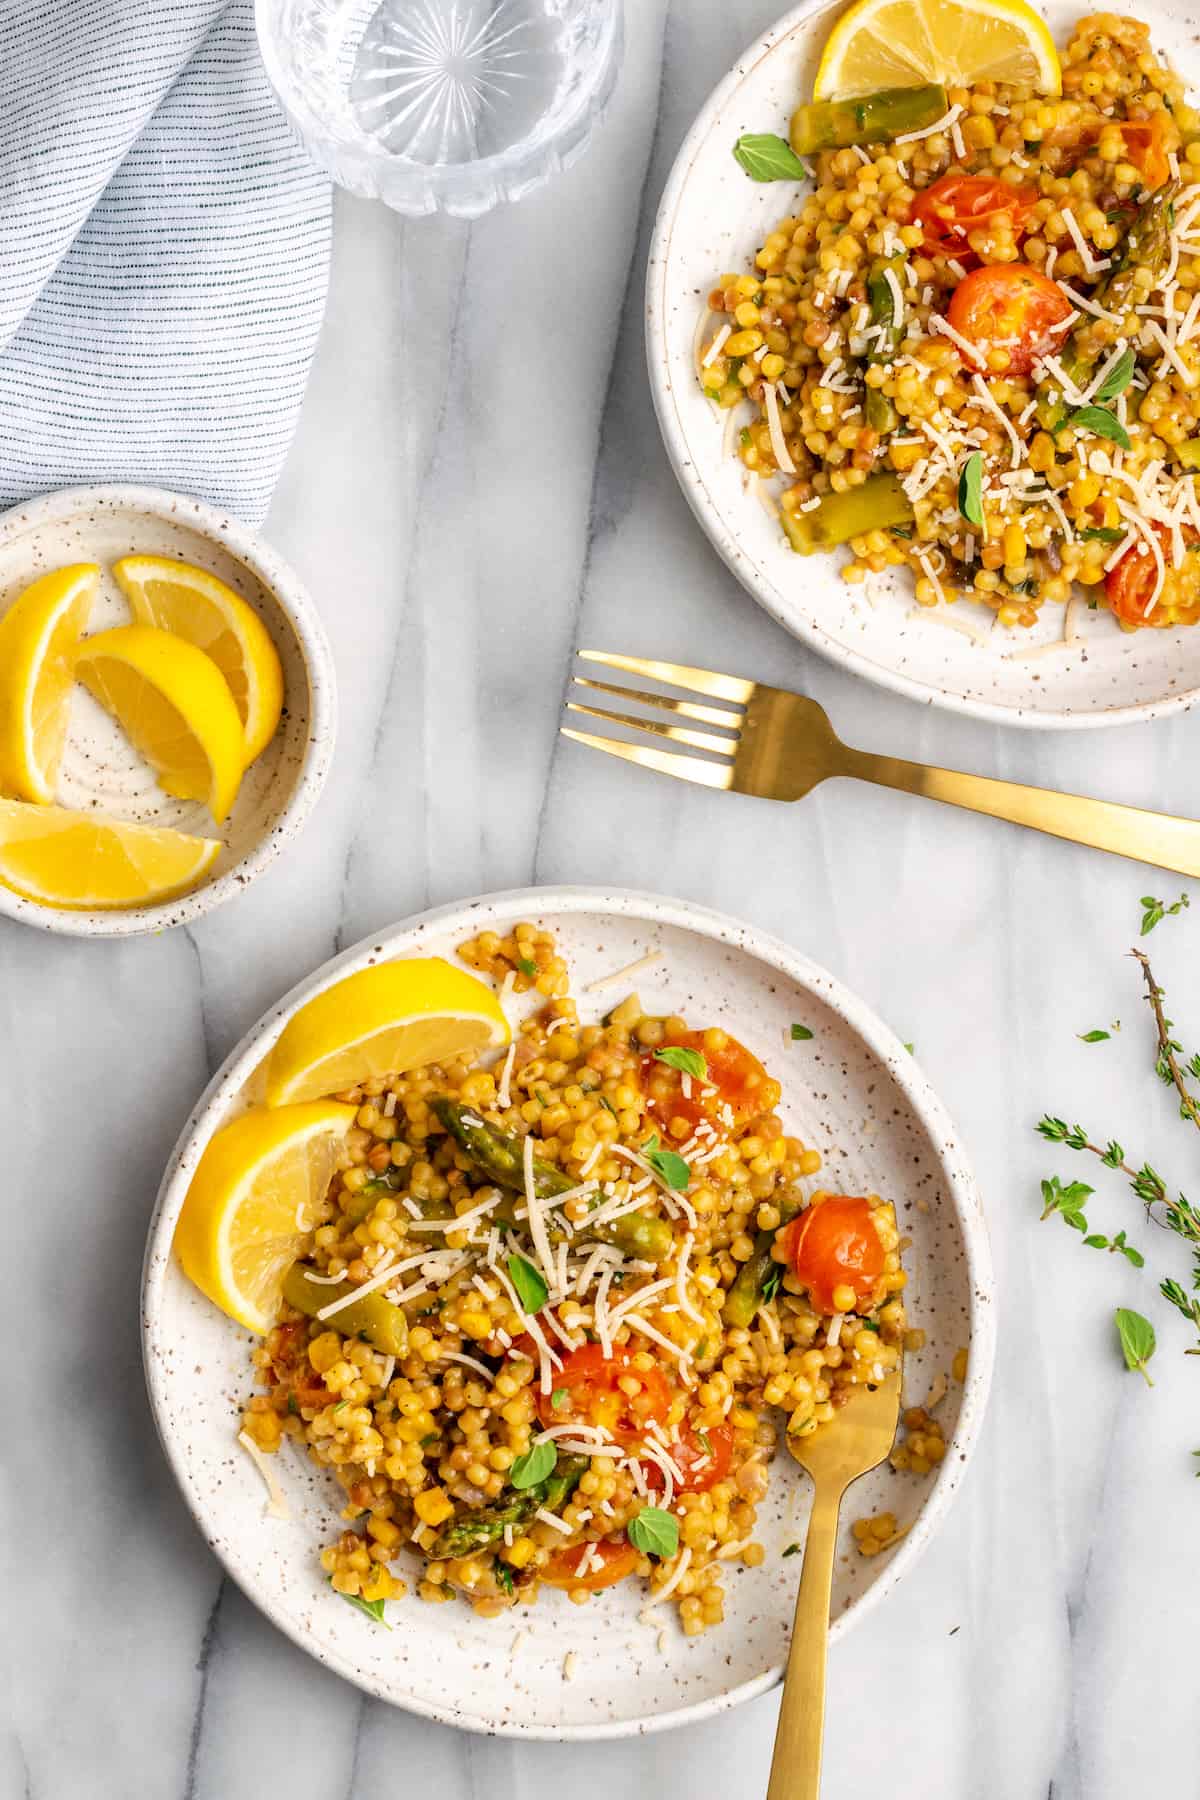 Two plates of Herb & Veggie Fregola with bowl of lemon wedges